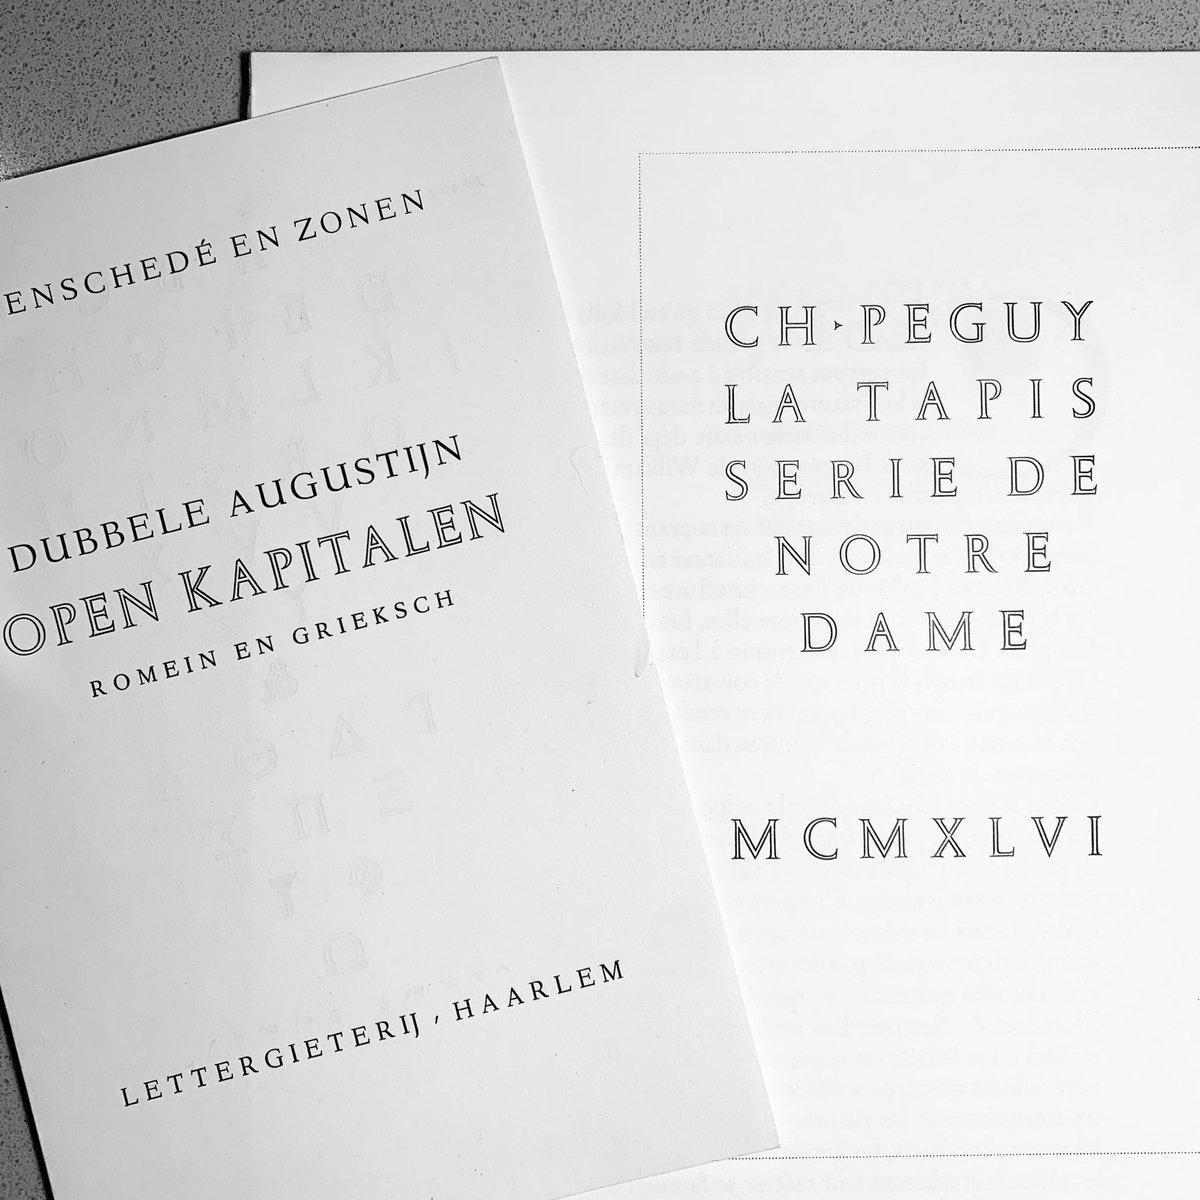 One of my favourite faces is Van Krimpen’s Open Kapitalen. Although I’ve been playing with using it on the title page for Beauty of Byrne, as here, the reality is I have a very limited fount of it and the single size equally limits its use. Watch this space!